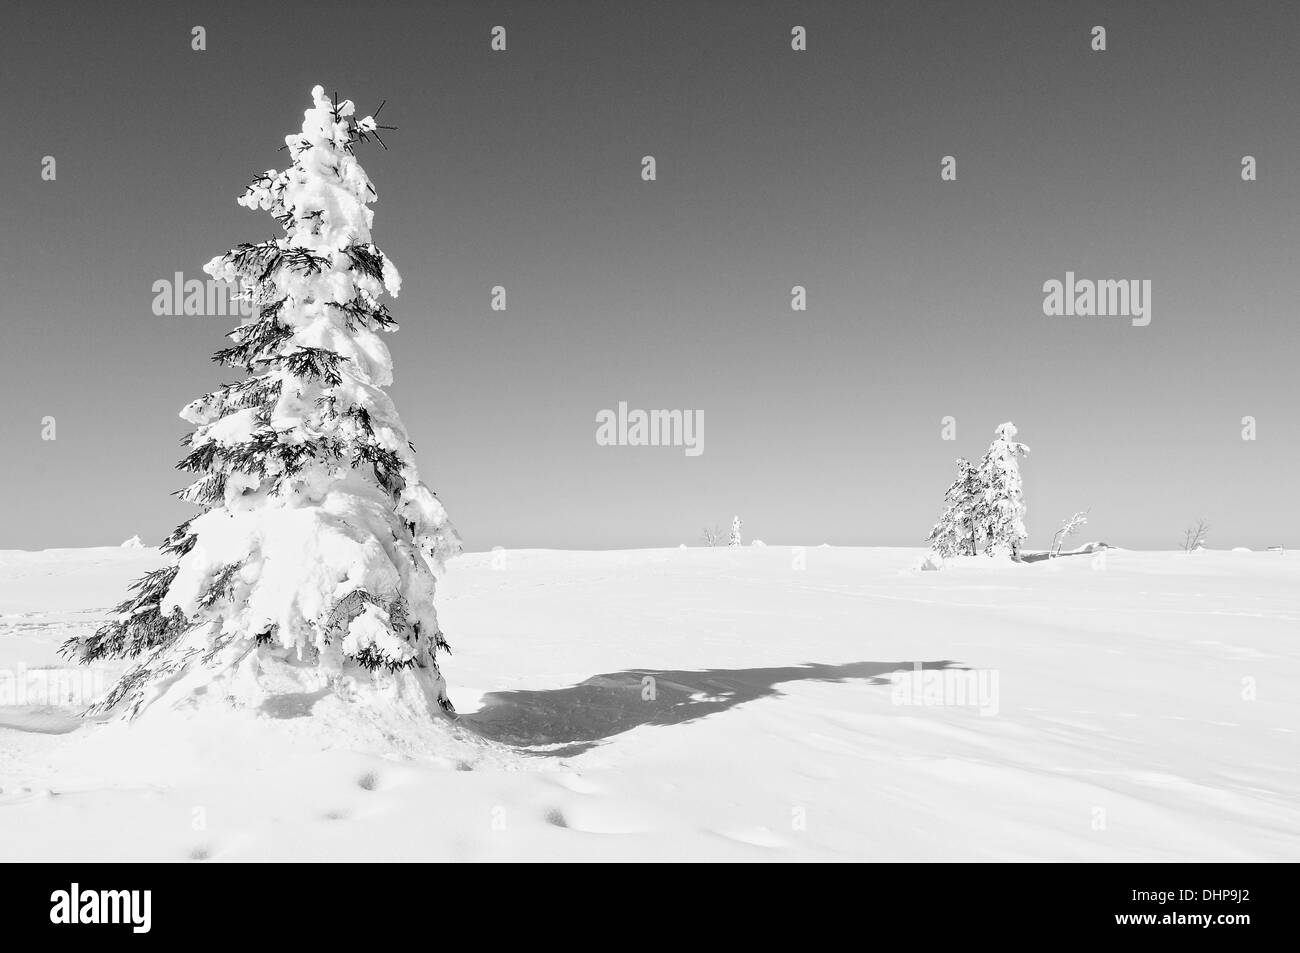 Sky with snowy pine trees black and white, Stock Photo